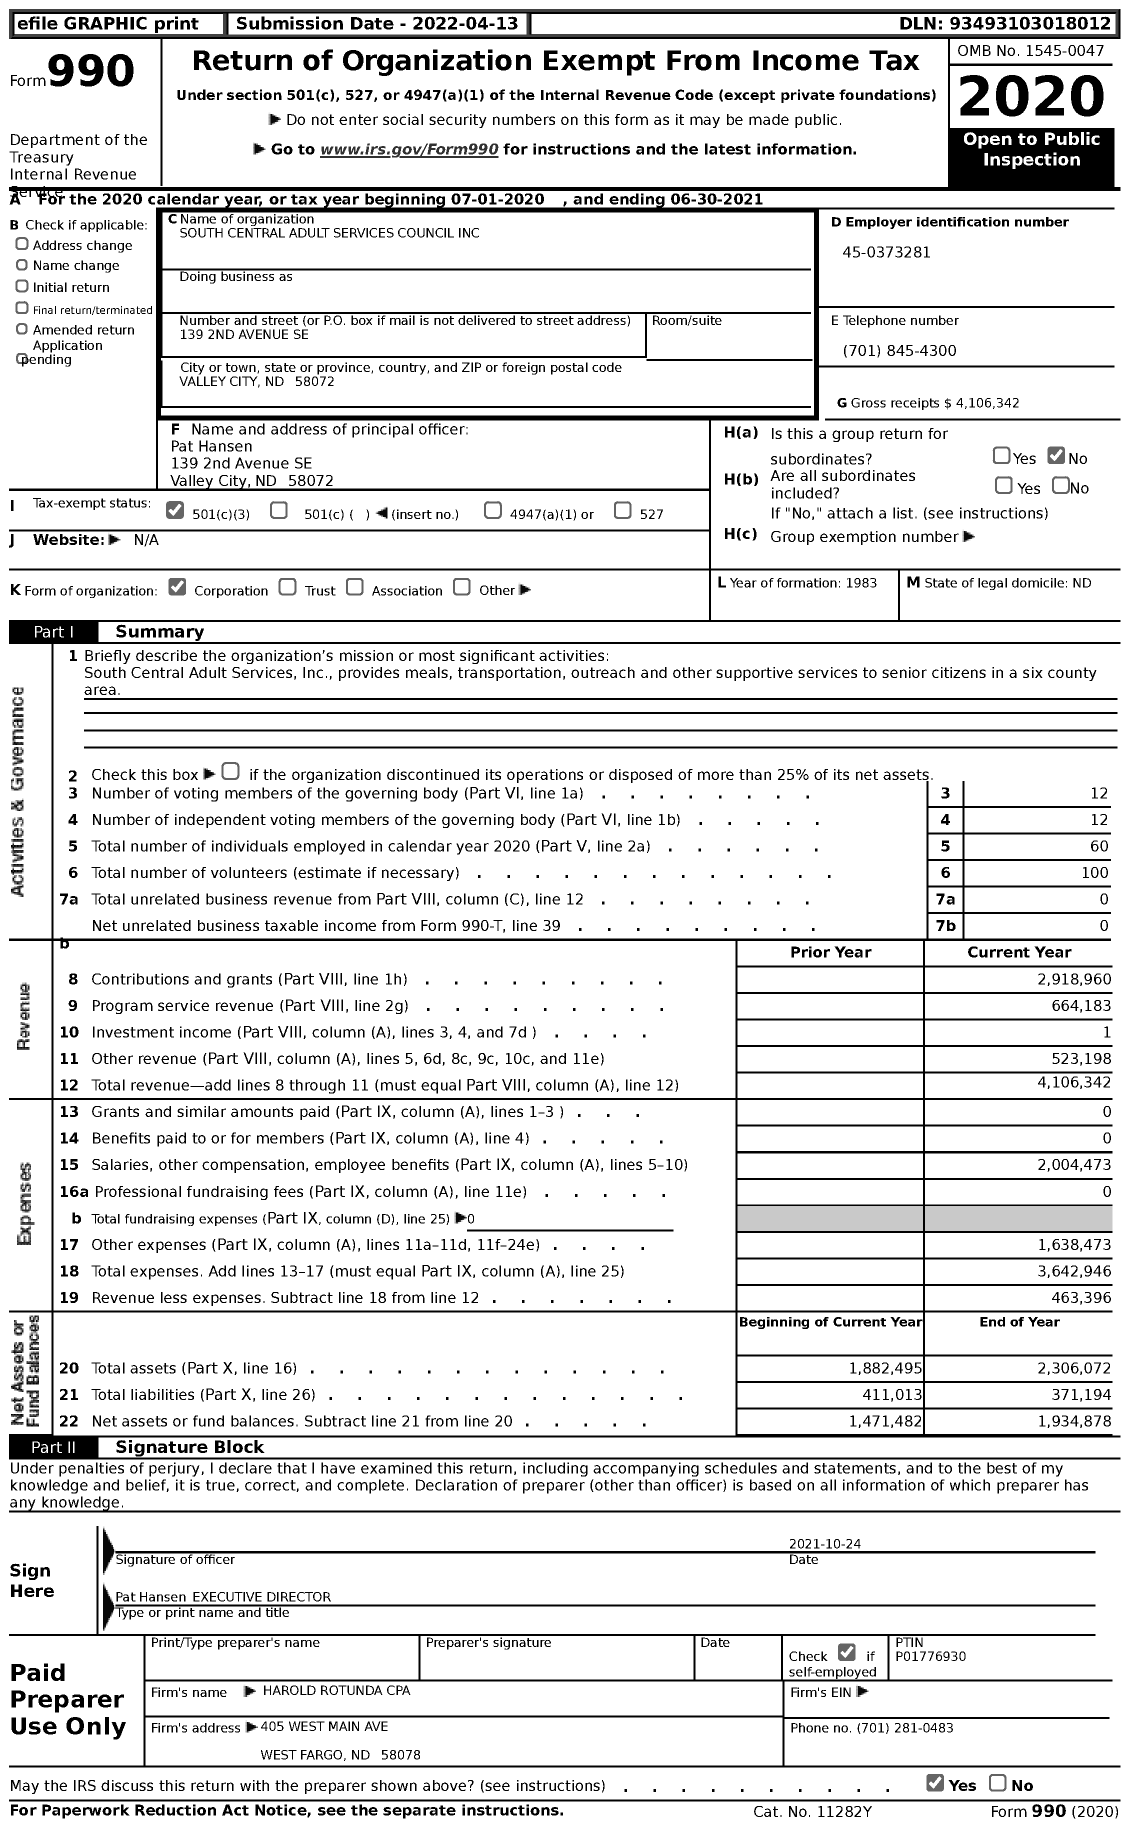 Image of first page of 2020 Form 990 for South Central Adult Services Council